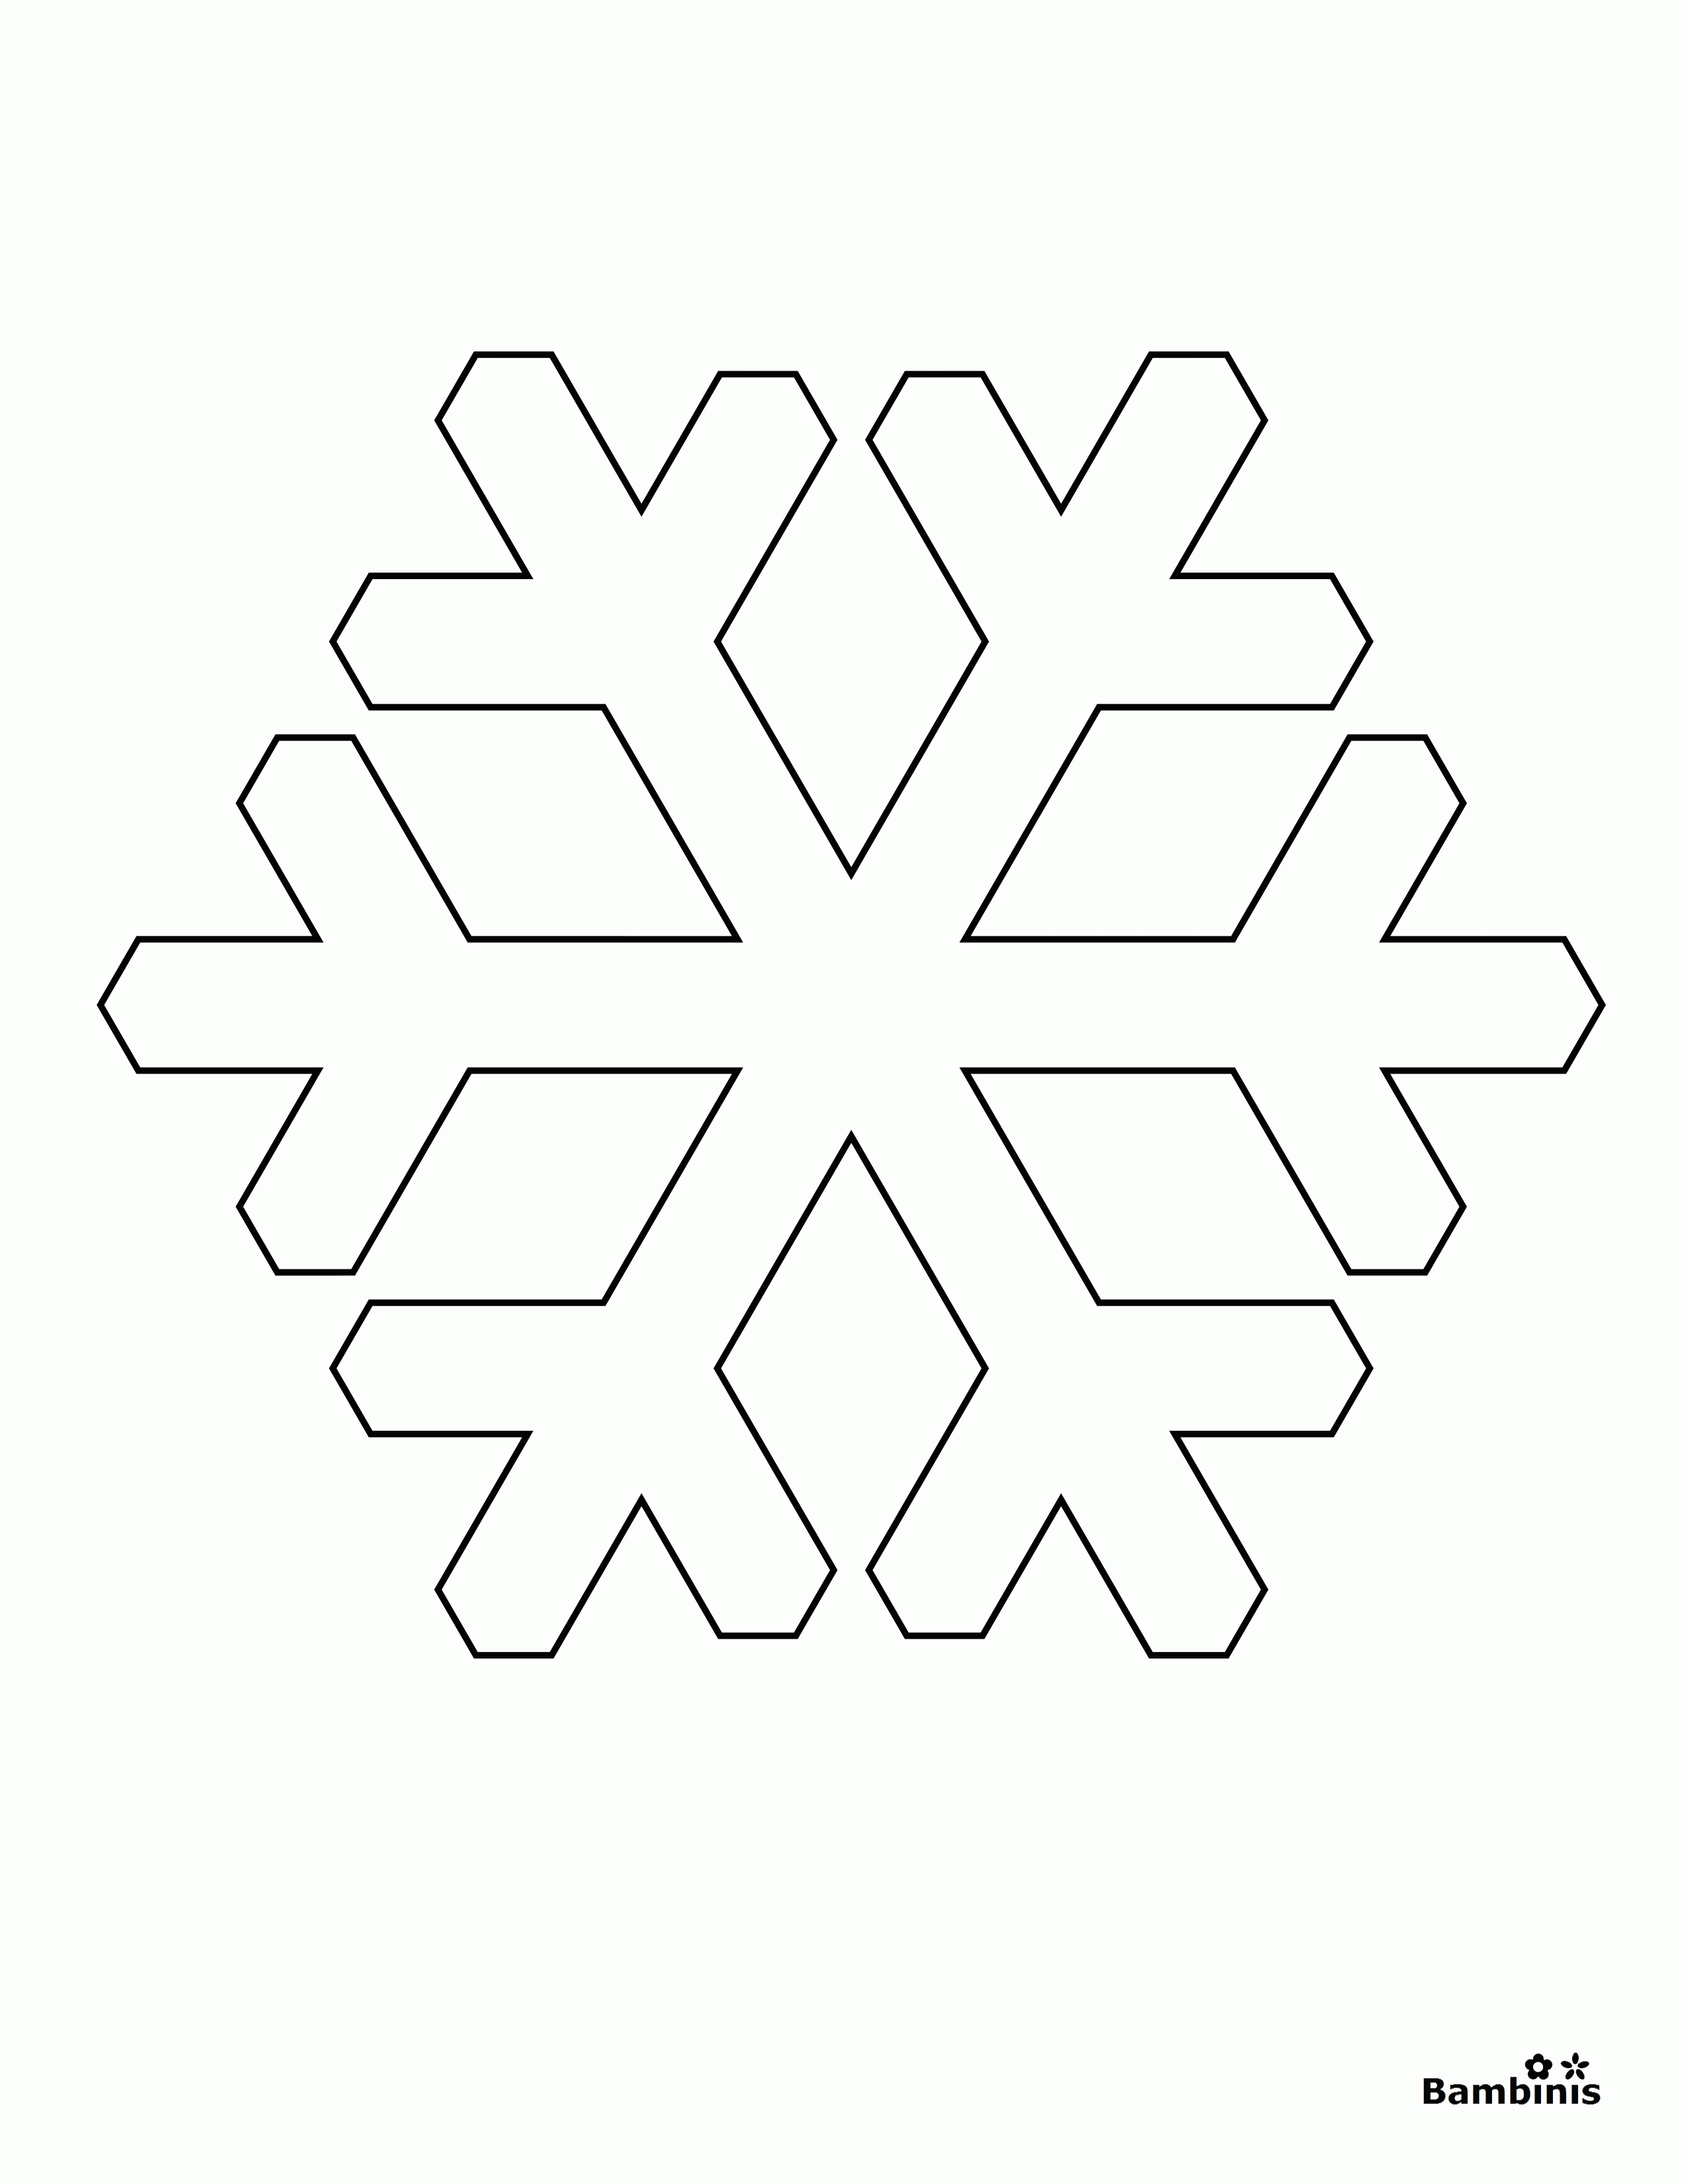 Snowflakes Coloring Page - Coloring Pages for Kids and for Adults